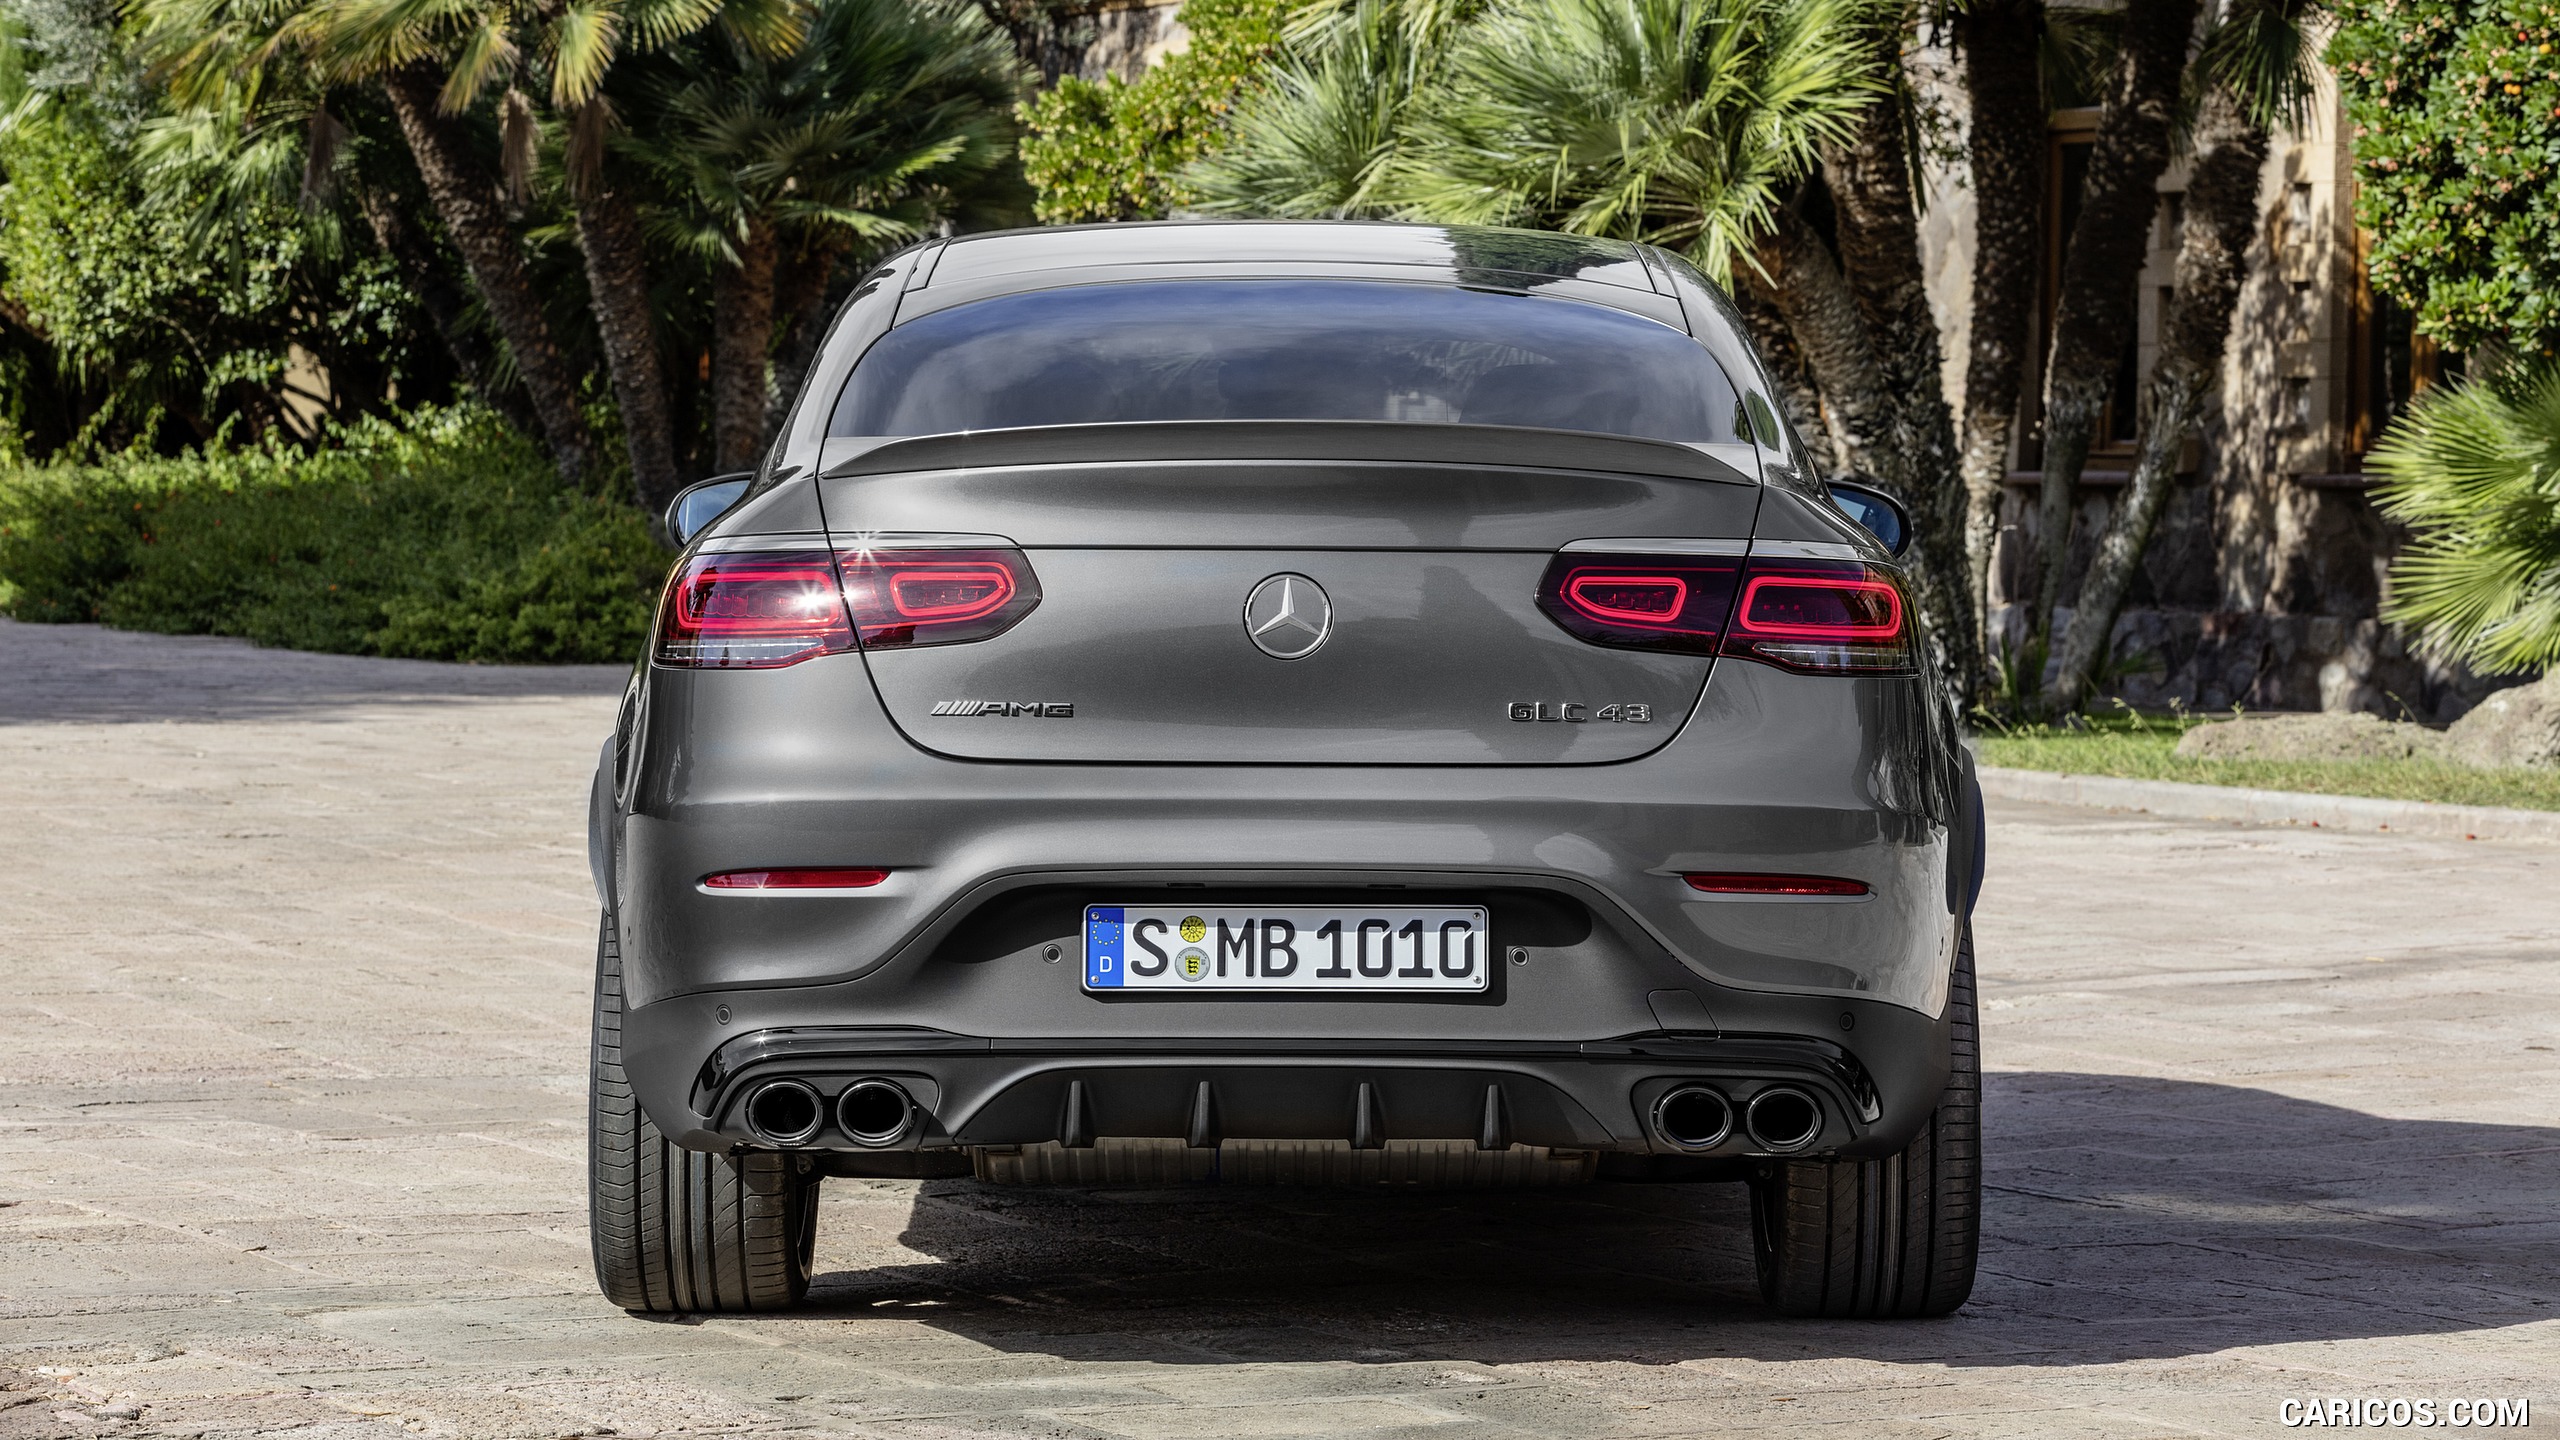 2020 Mercedes-AMG GLC 43 4MATIC Coupe - Rear, #17 of 173